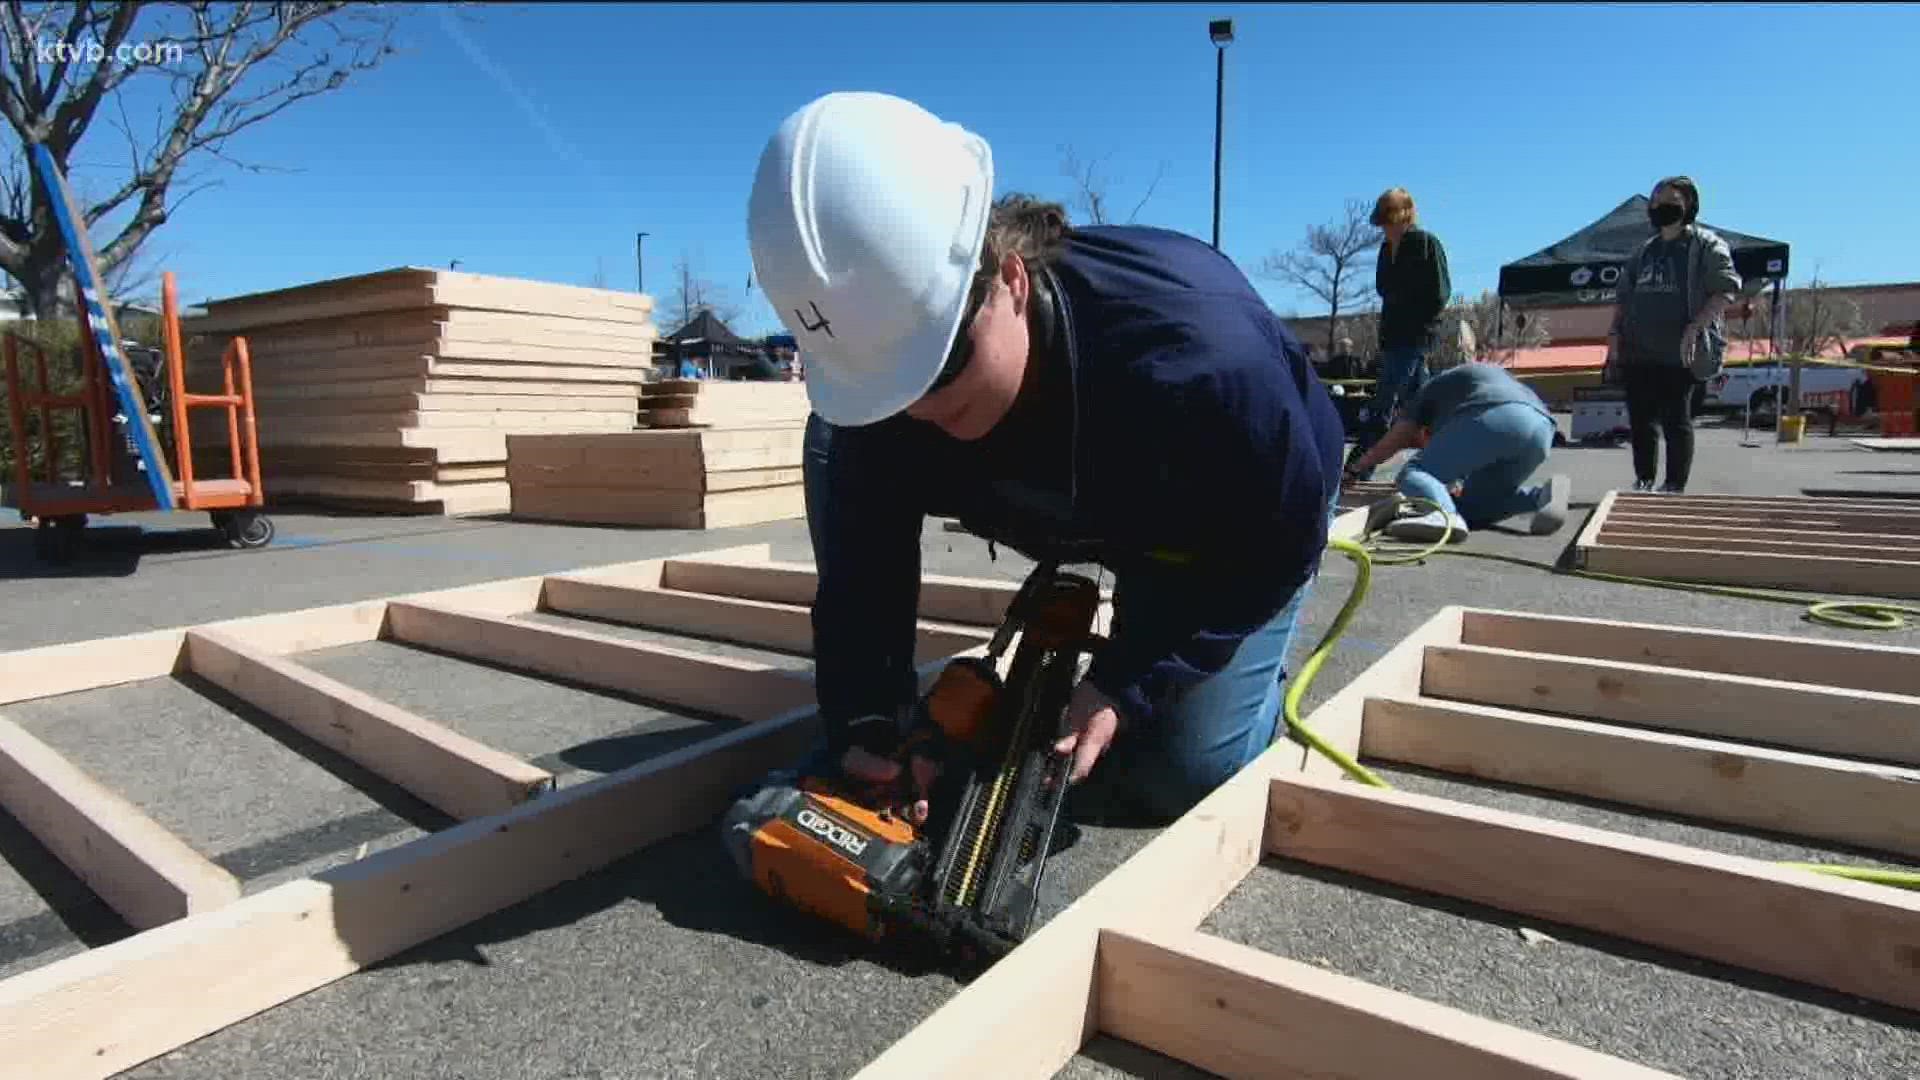 The construction industry has faced a labor shortage since the 2008 recession according to the Building Contractors Association of Southwestern Idaho.